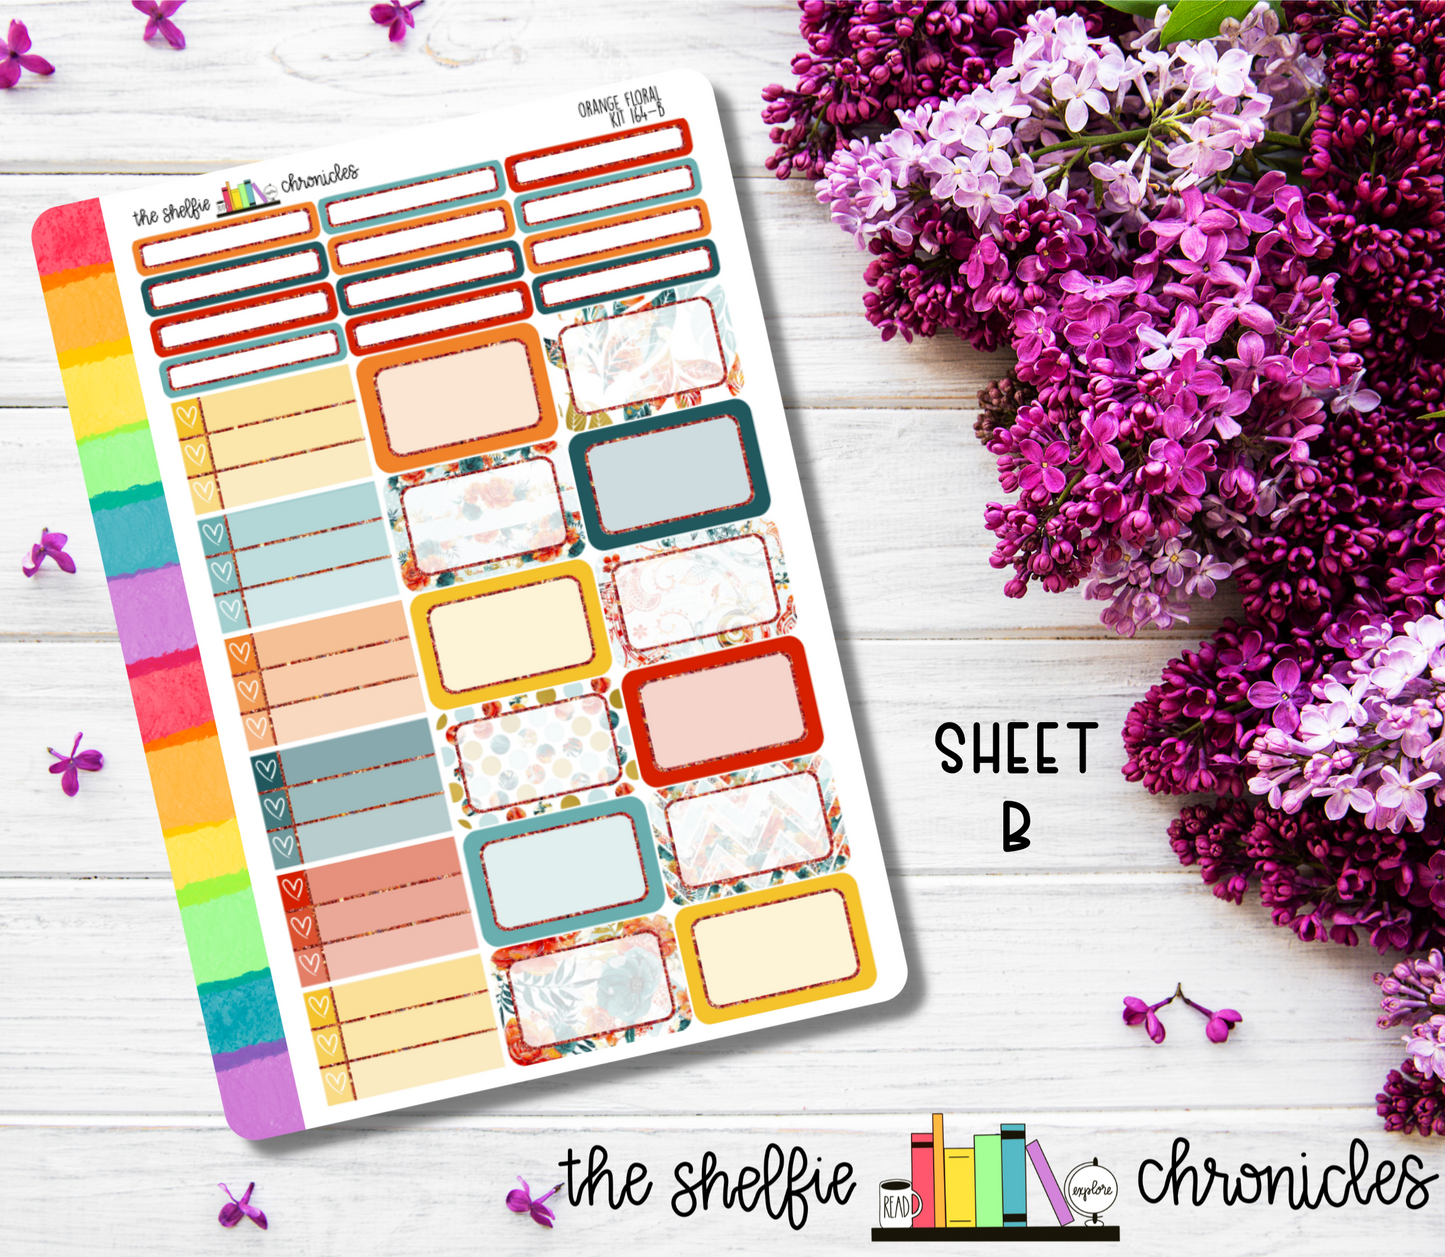 Kit 164 - Orange Floral Weekly Kit - Die Cut Stickers - Repositionable Paper - Made To Fit 7x9 Planners